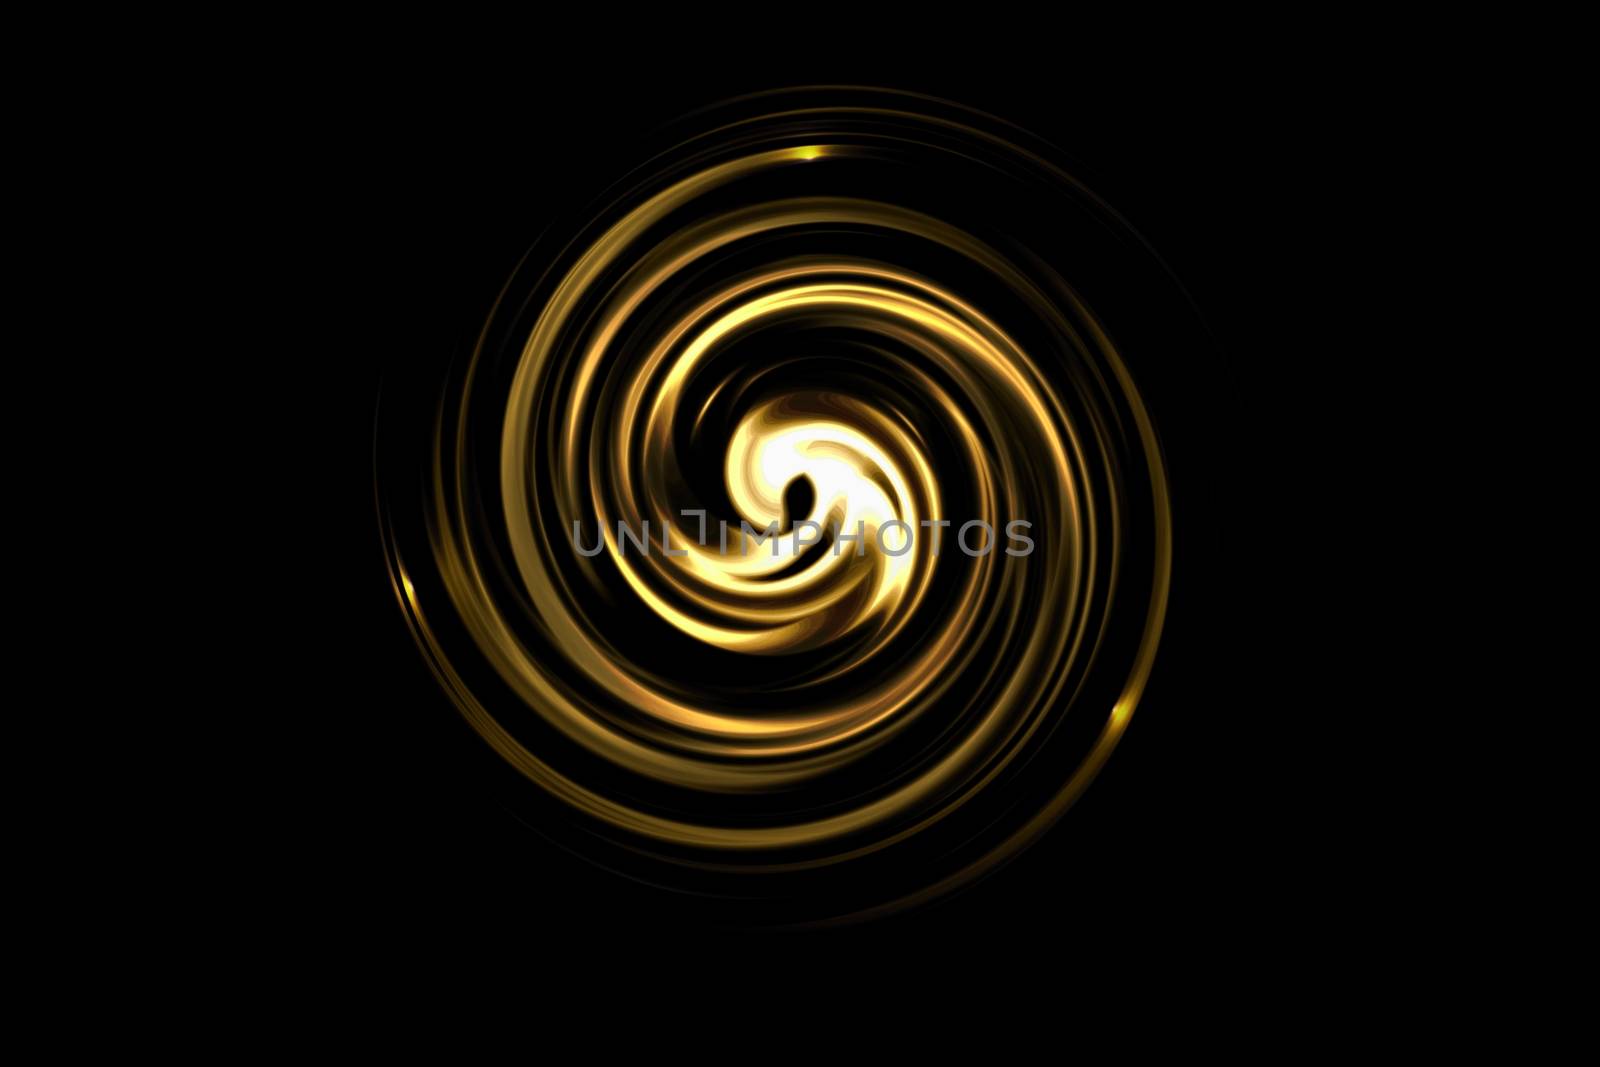 Abstract golden circle with light spiral on black background